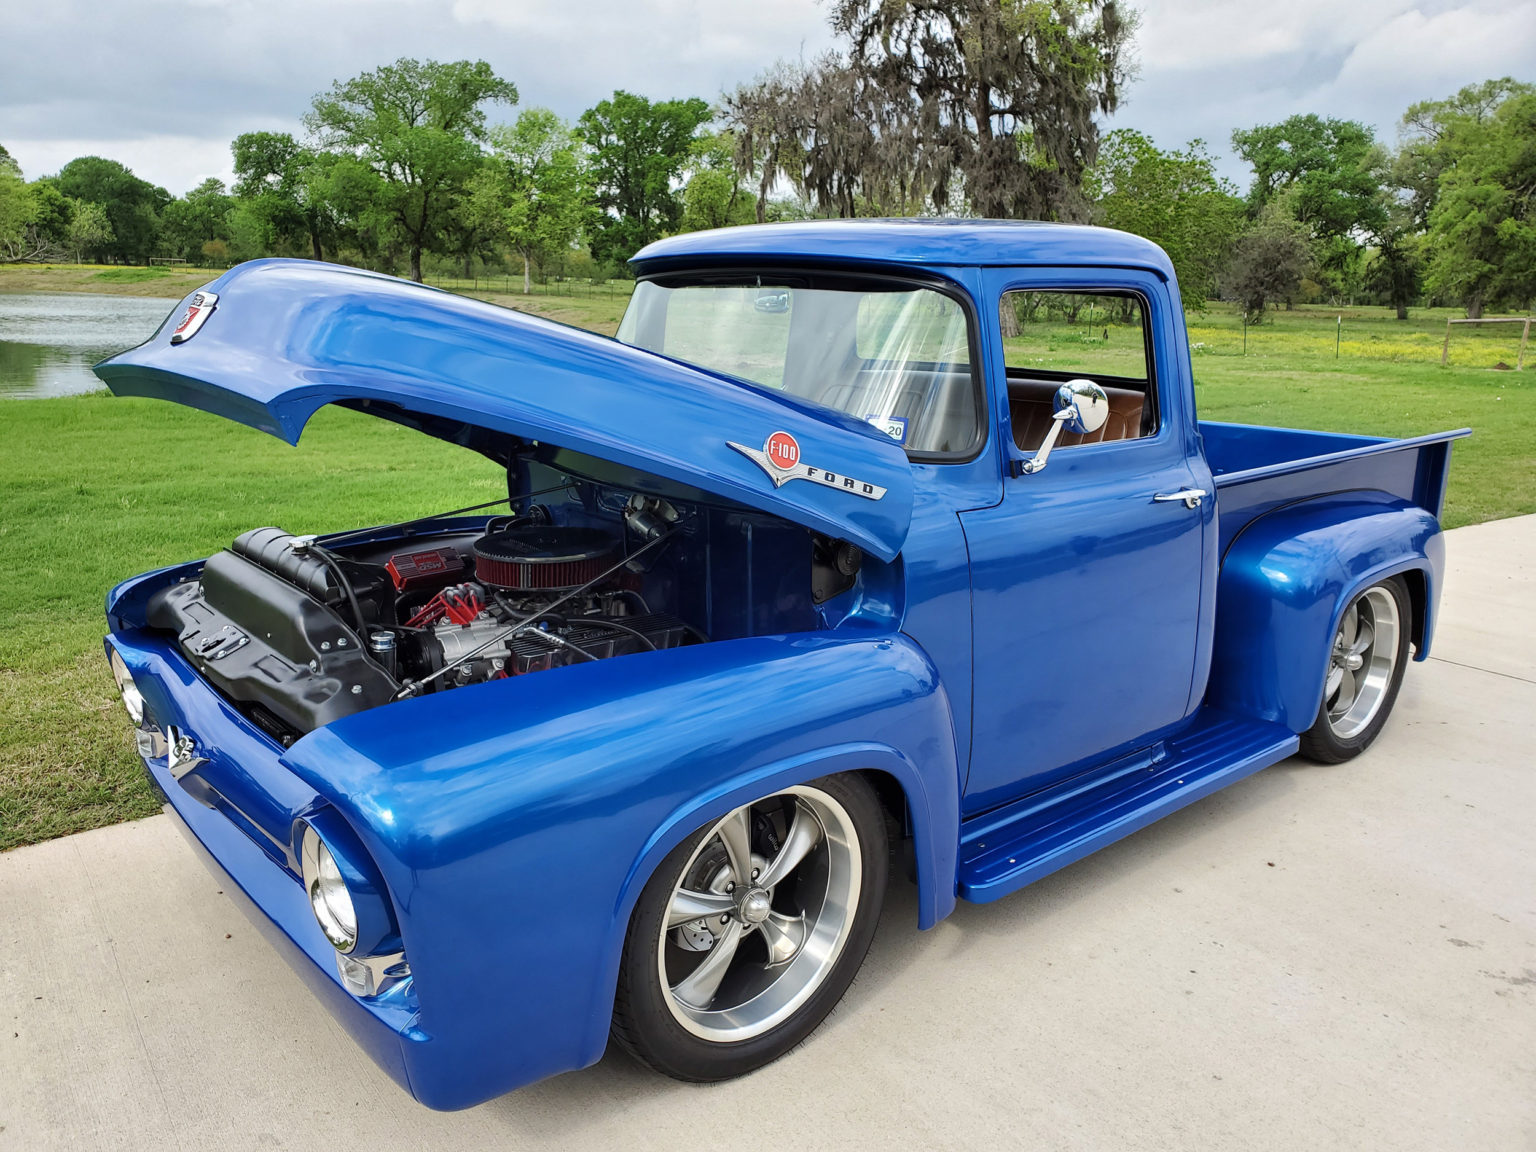 This 1956 Ford F100 is just one of the vehicles being shown this week during the WHM x AutomotiveMap Virtual Car Show.